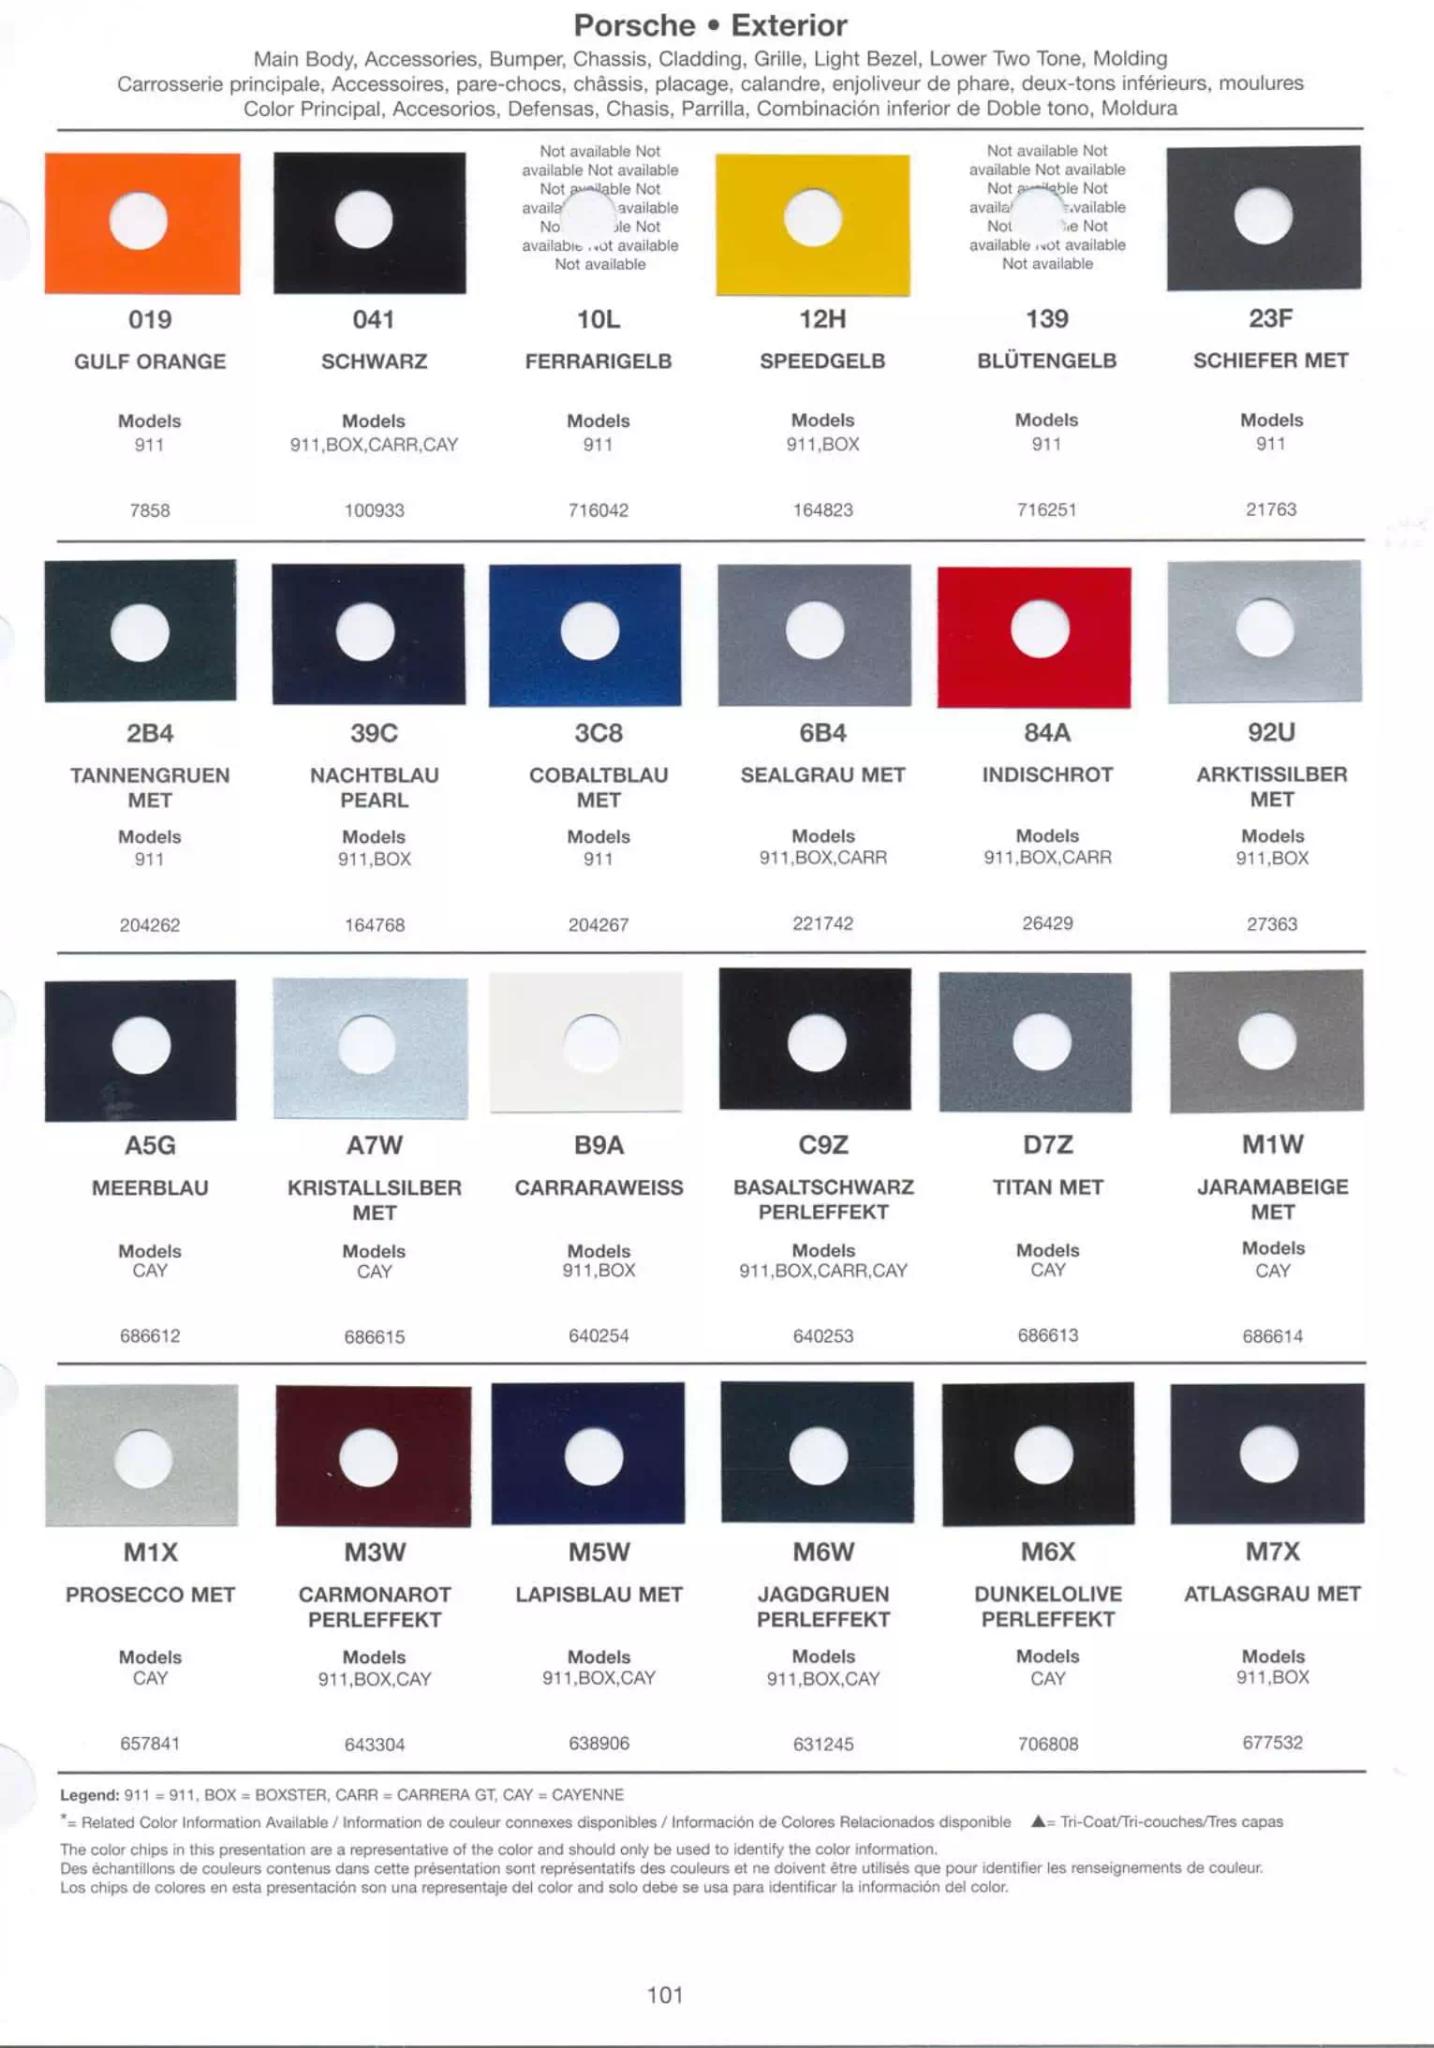 Exterior Paint Codes for Porsche and their color codes